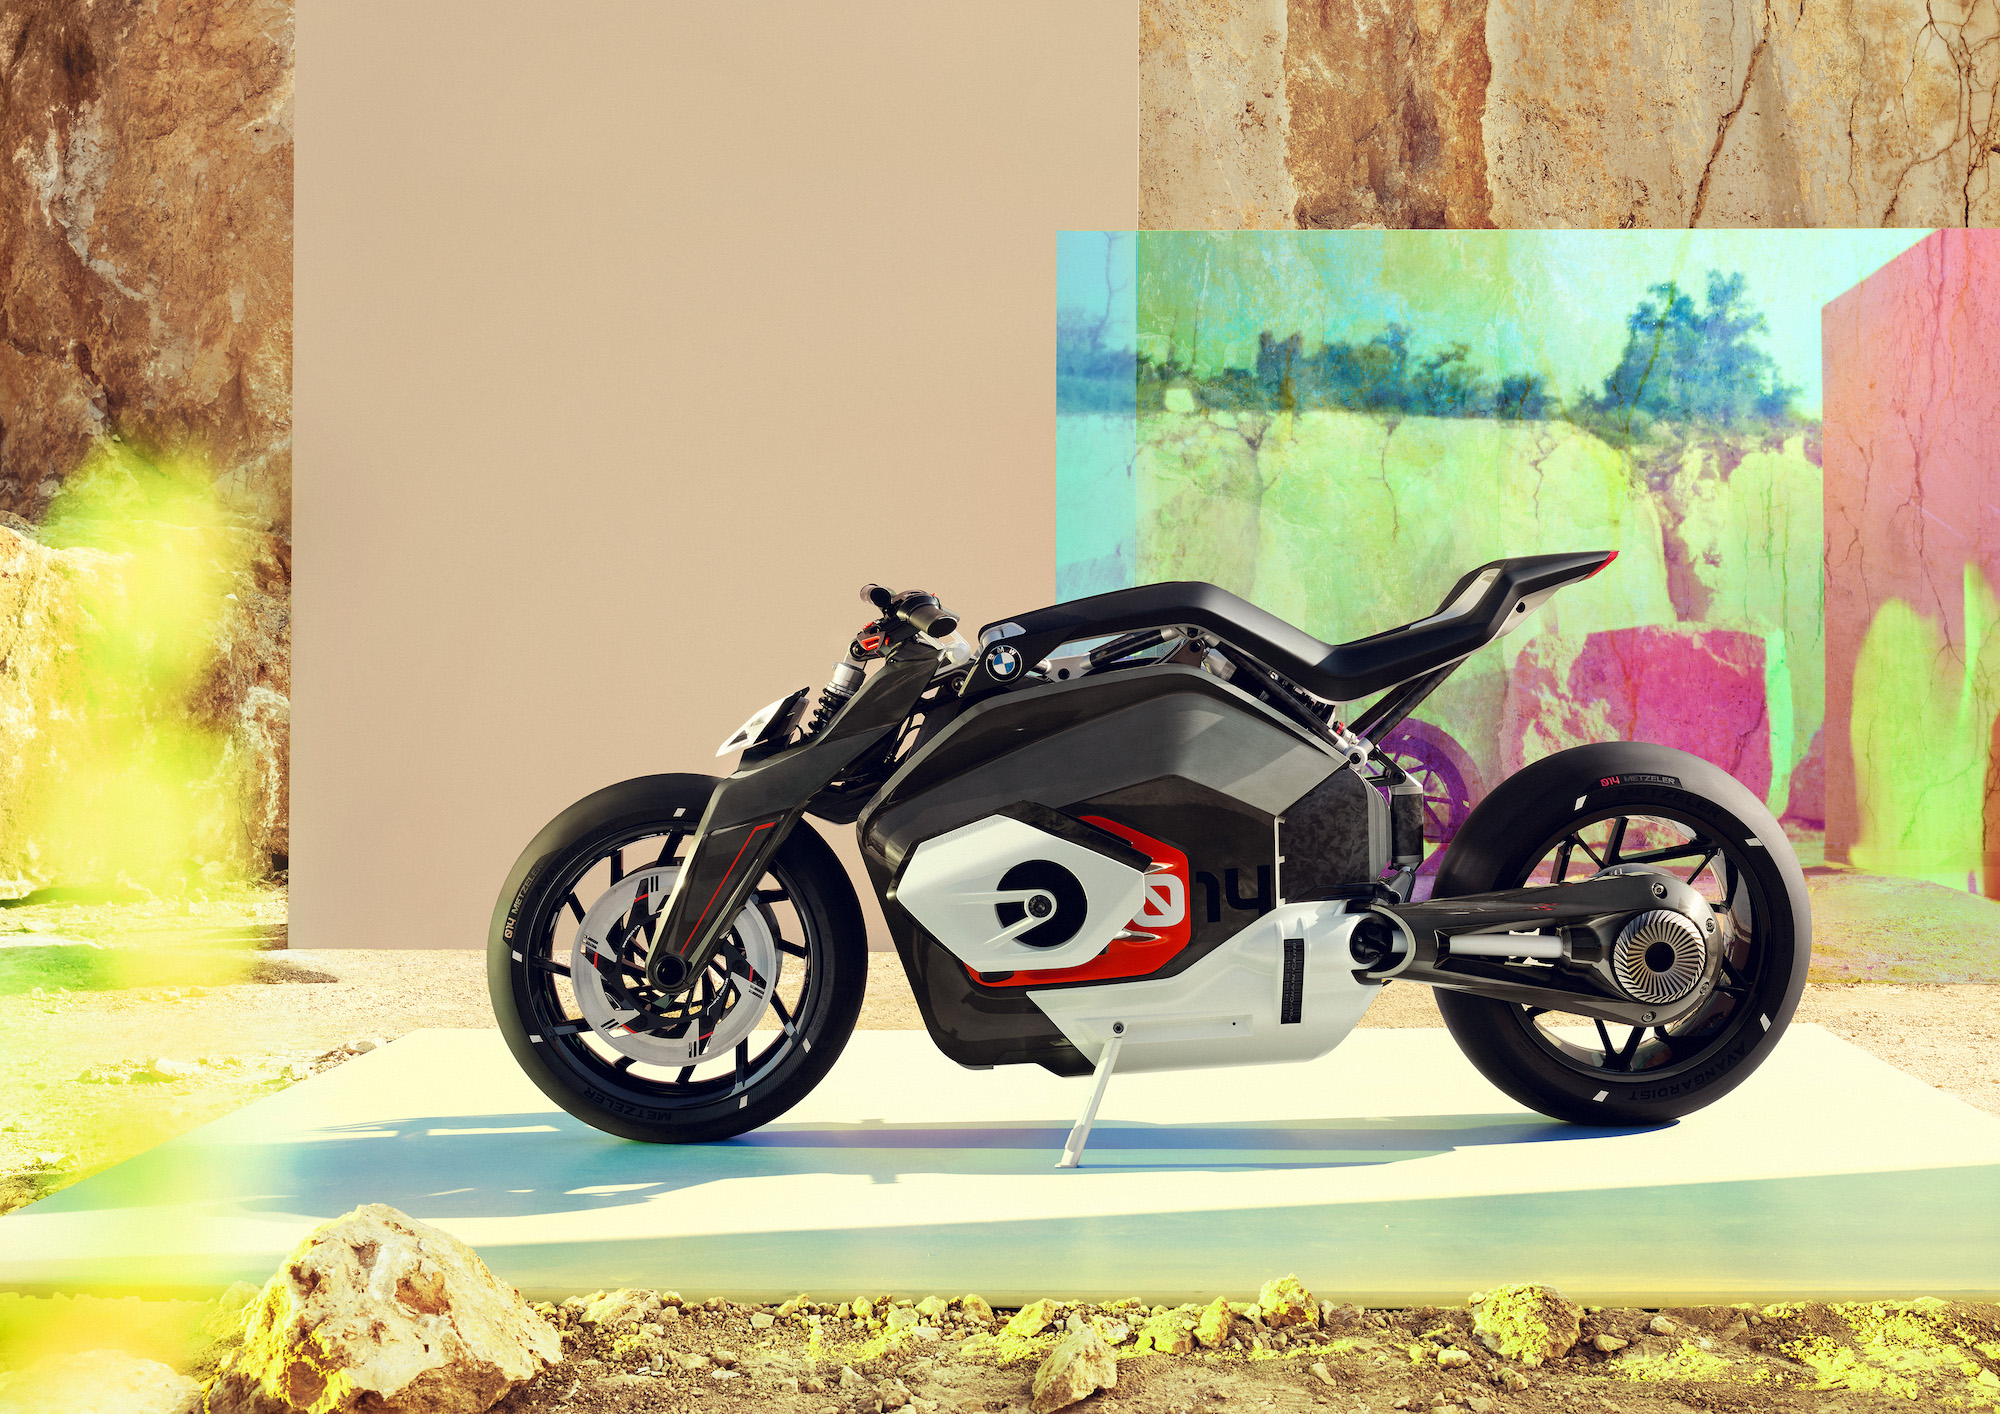 BMW electric motorcycle with sport bike design seen in patent drawings